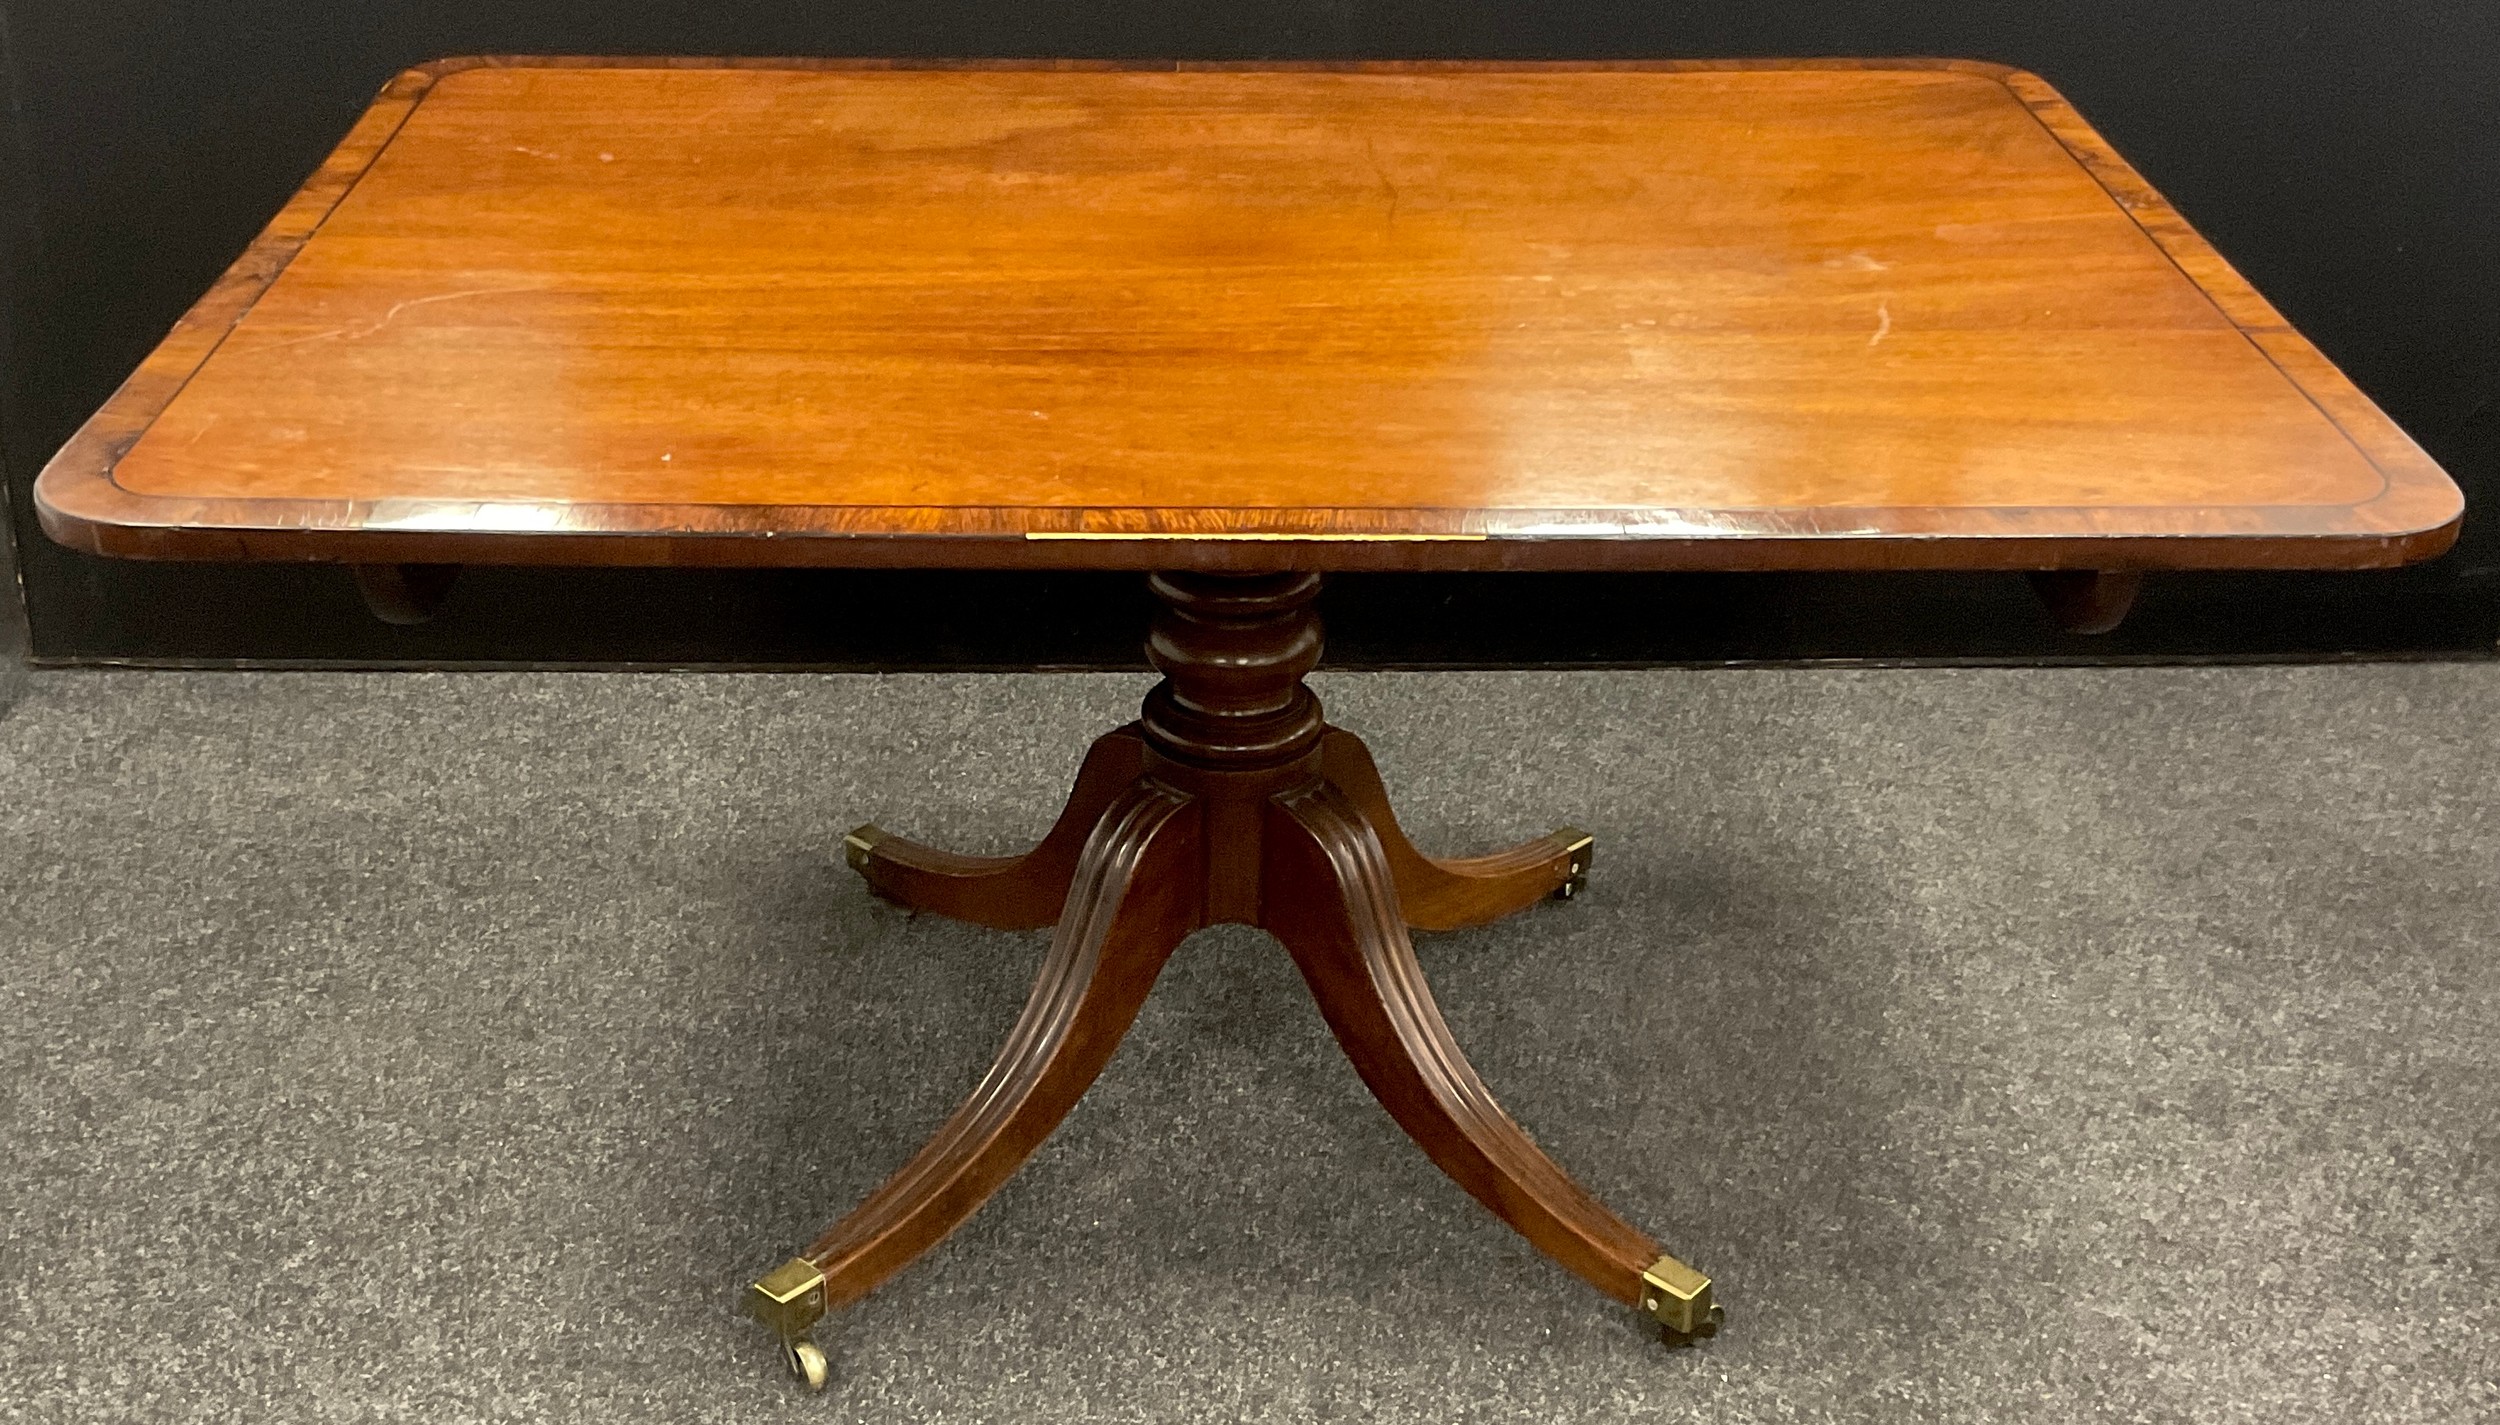 A 19th century mahogany rounded rectangular breakfast table, 71cm high x 133.5cm x 97.5cm. - Image 2 of 3